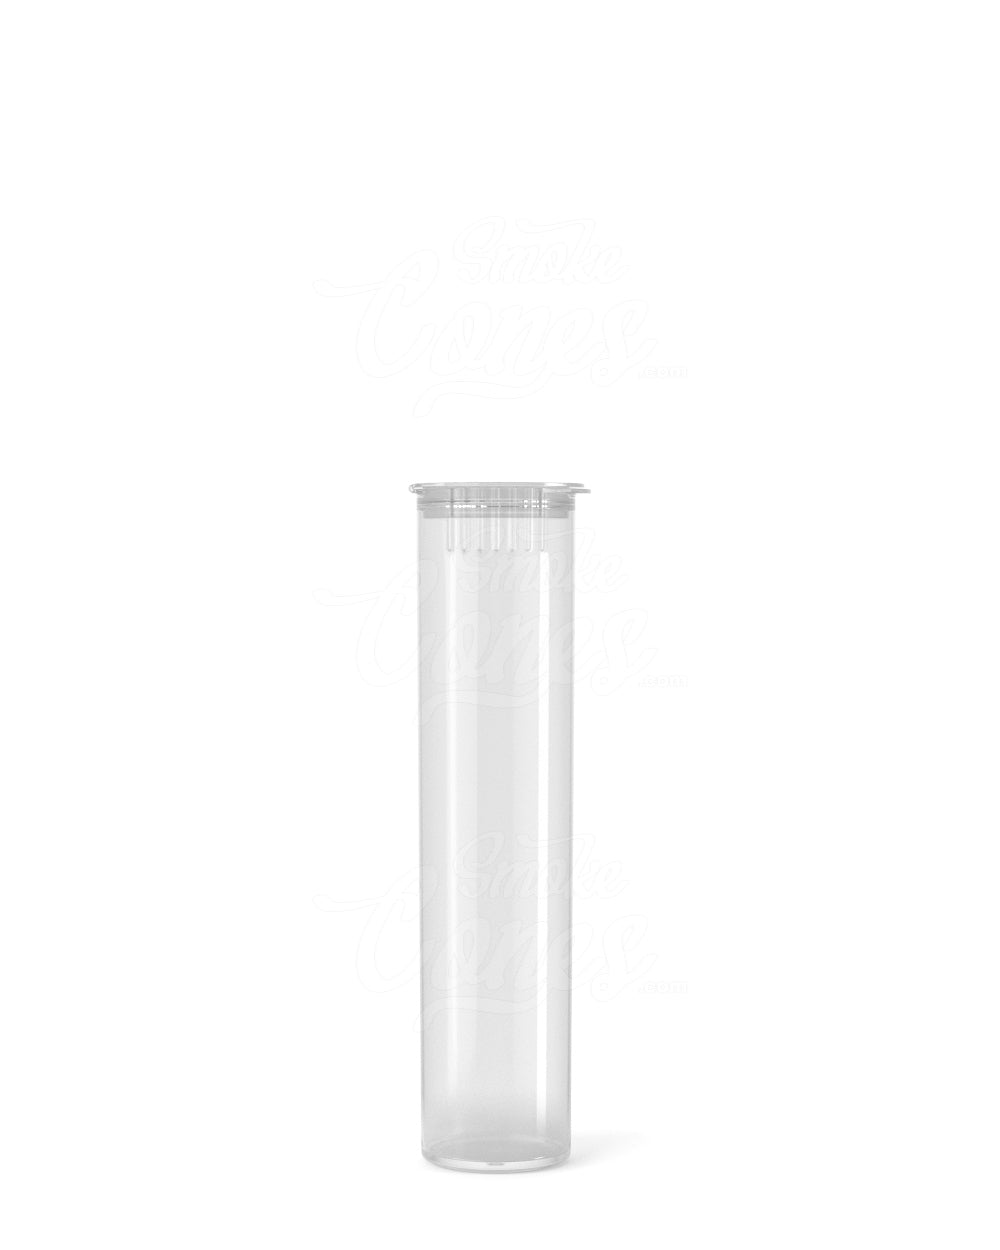 80mm Child Resistant Pop Top Clear Plastic Pre-Roll Tubes 1000/Box - 2